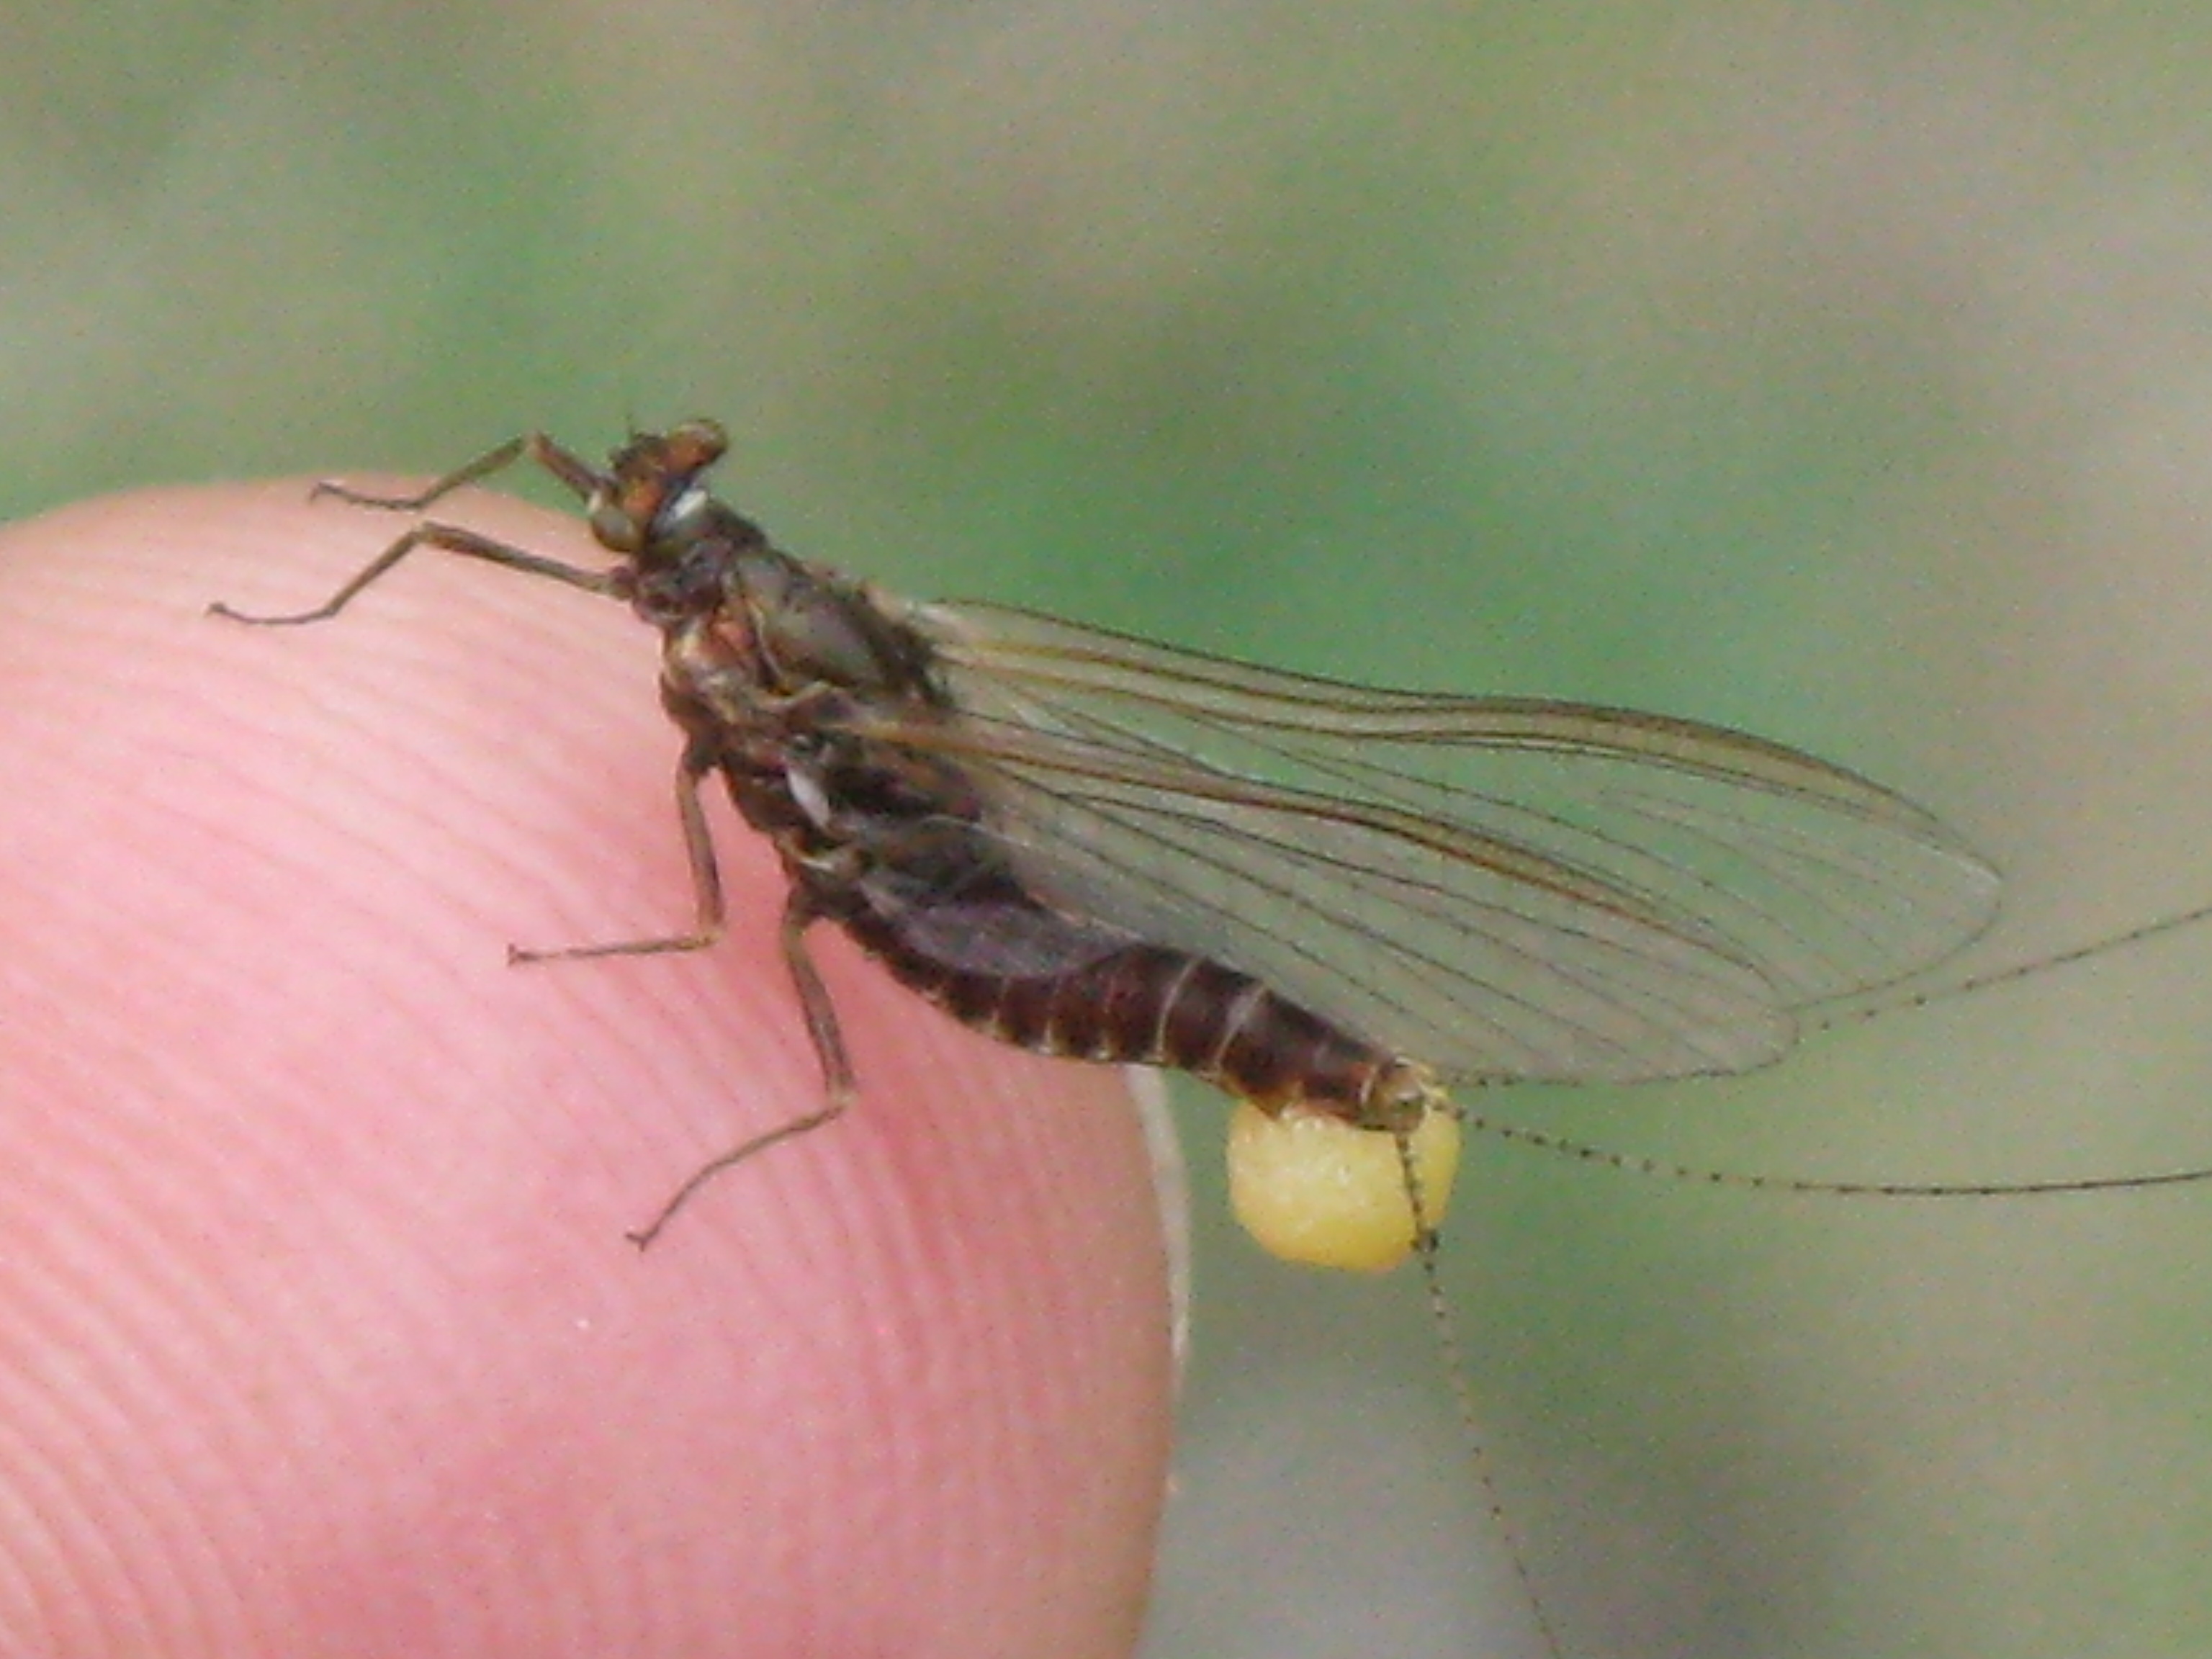 Female hendrickson mayfly with egg sack attached